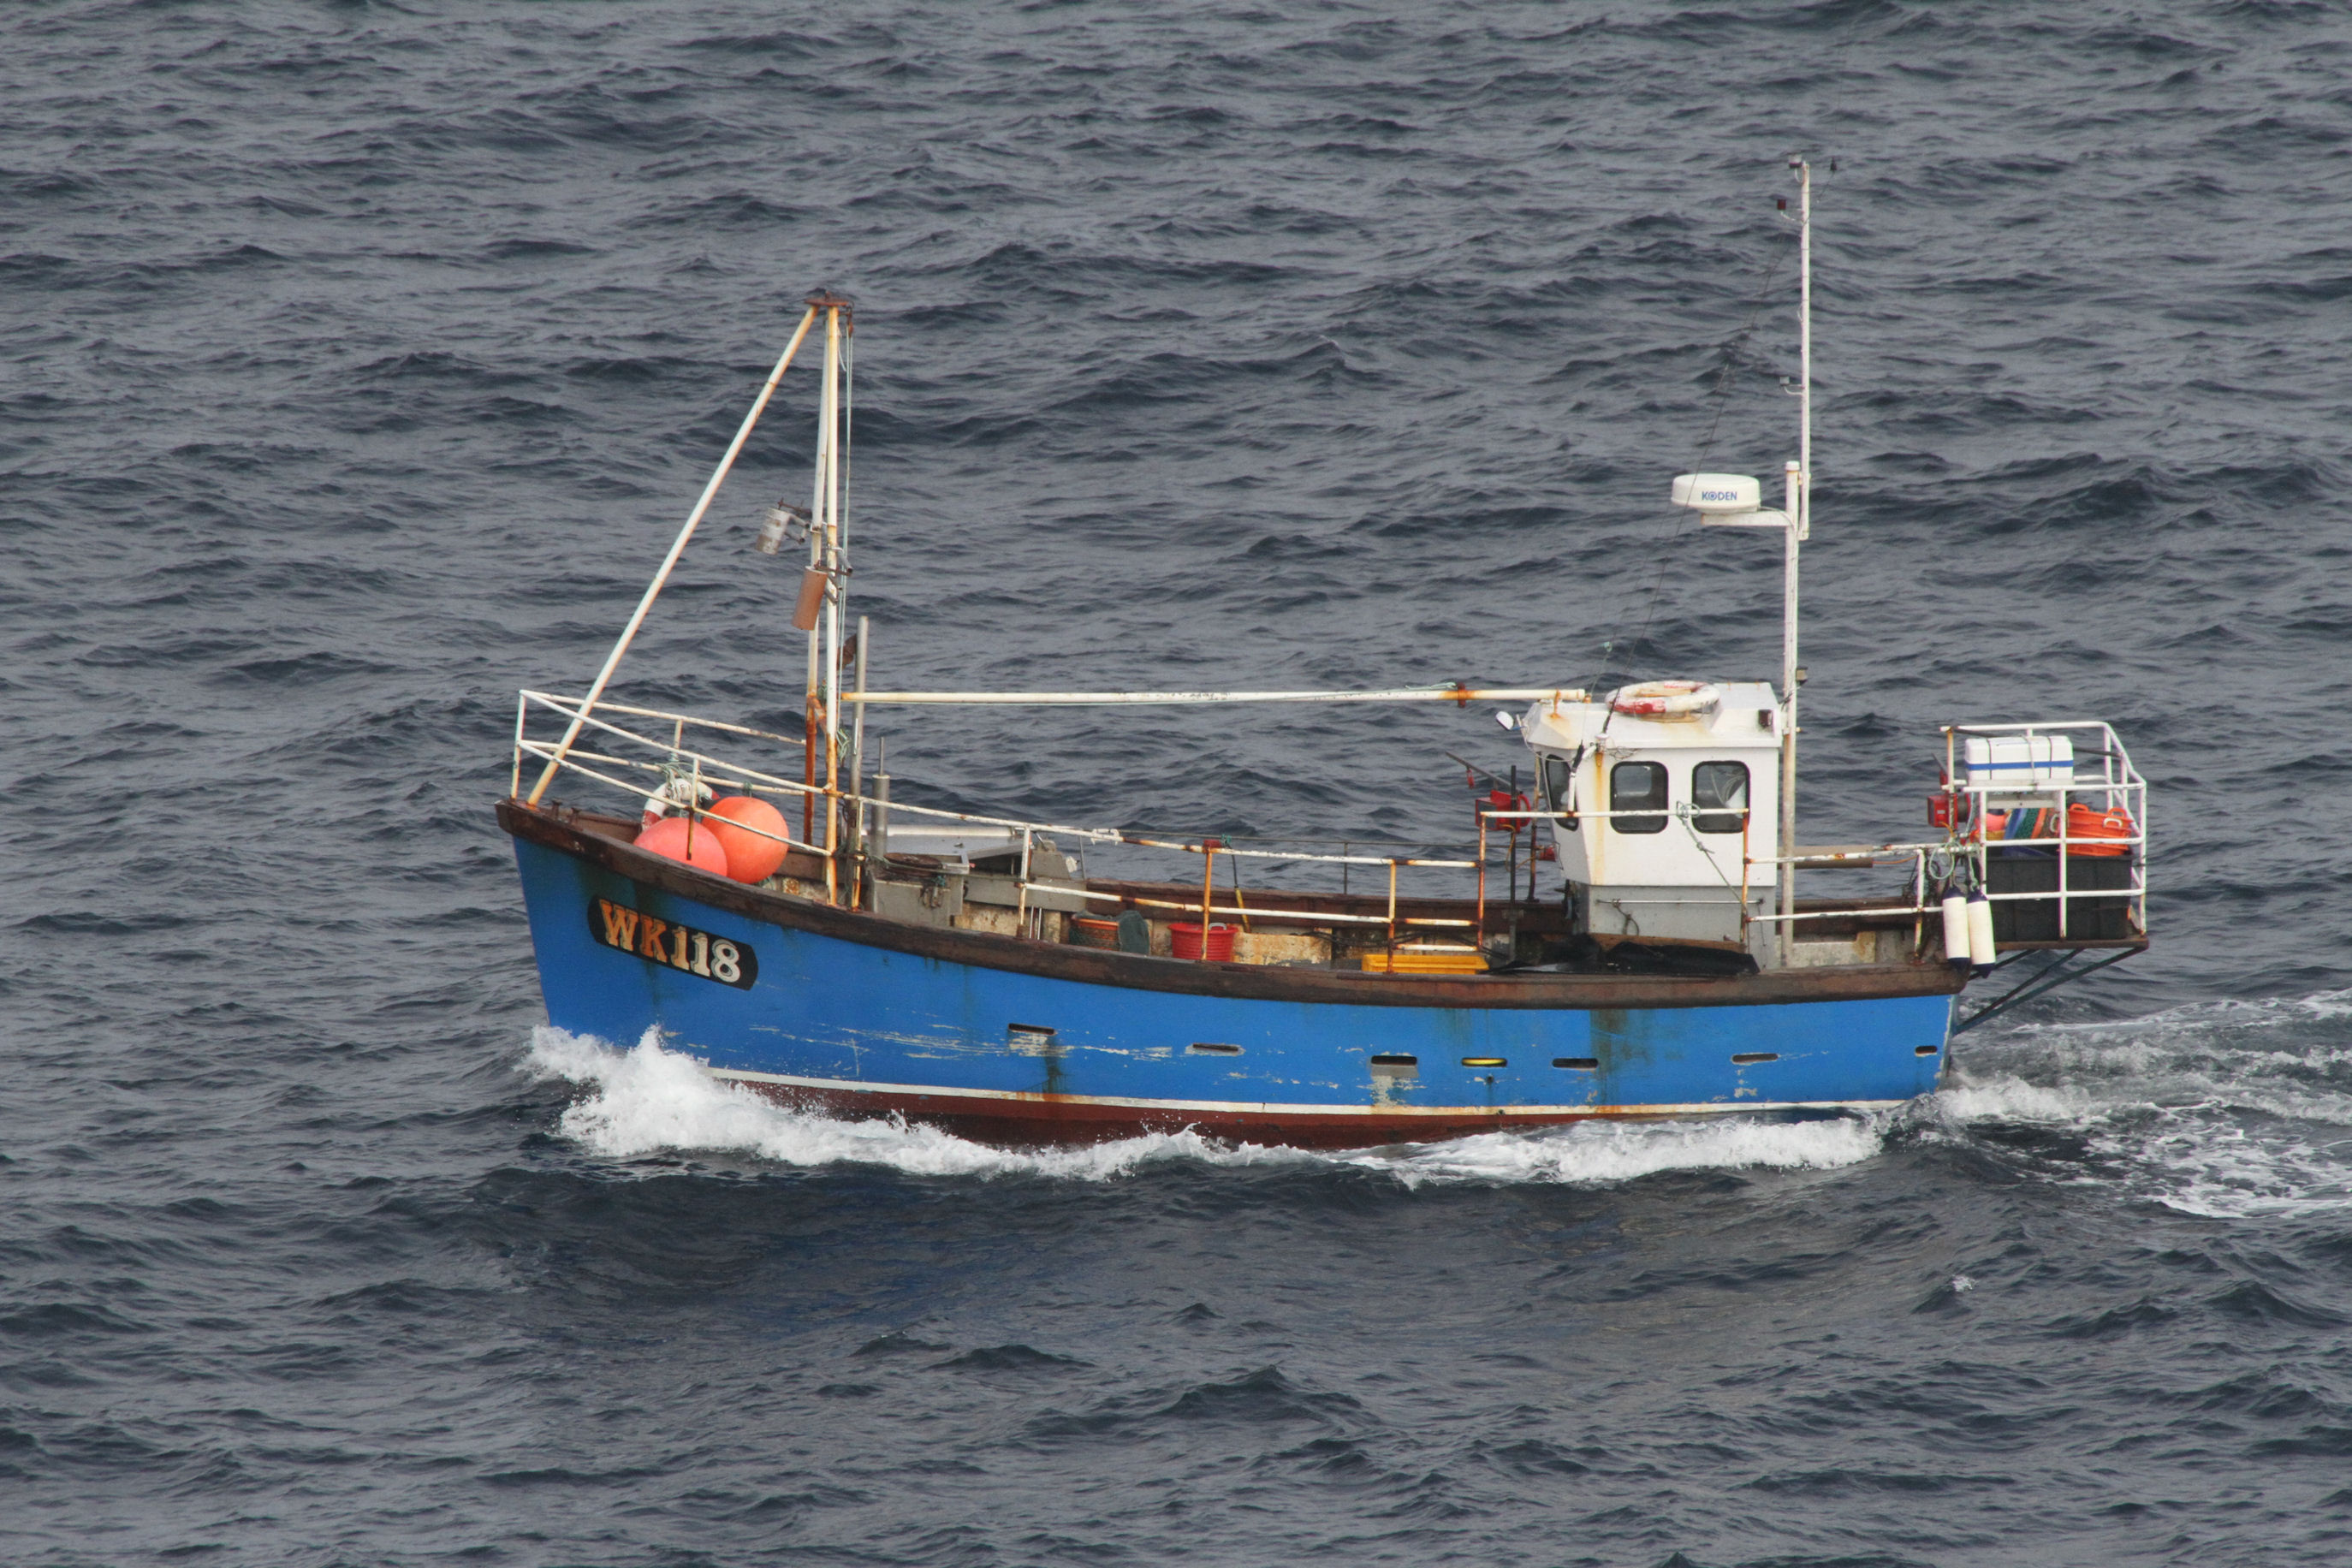 Man rescued from fishing boat | The Shetland Times Ltd